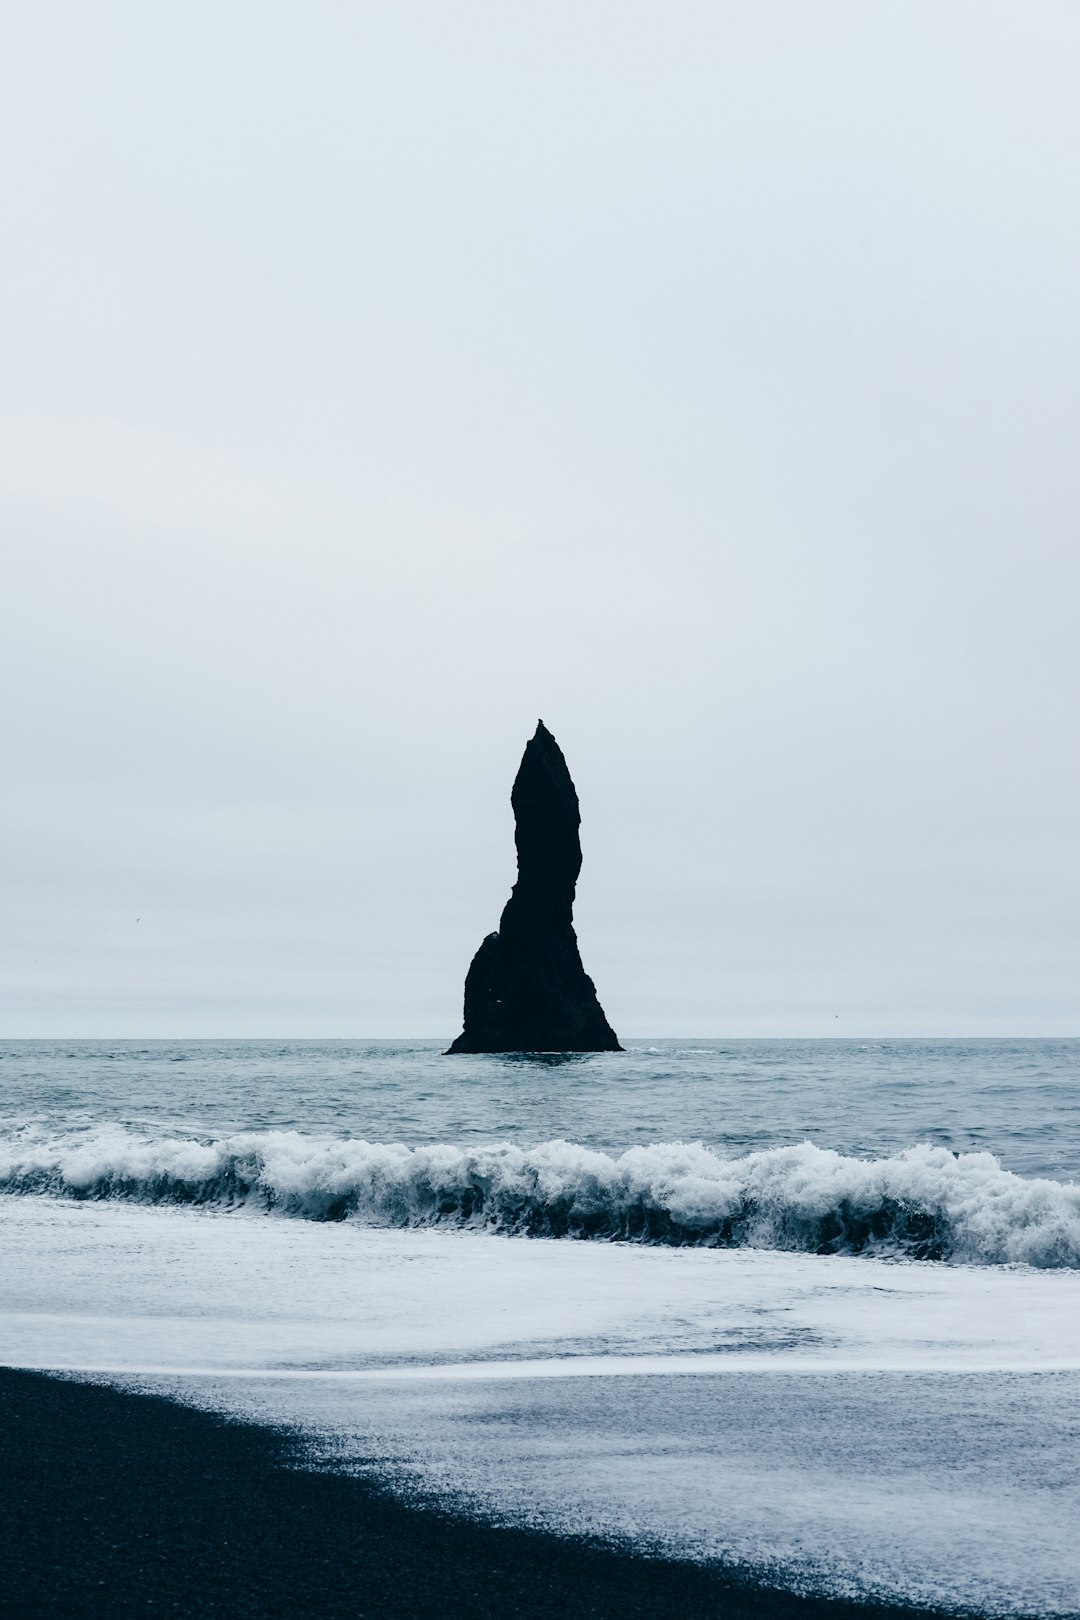 Travel Tips and Stories of Reynisdrangar in Iceland